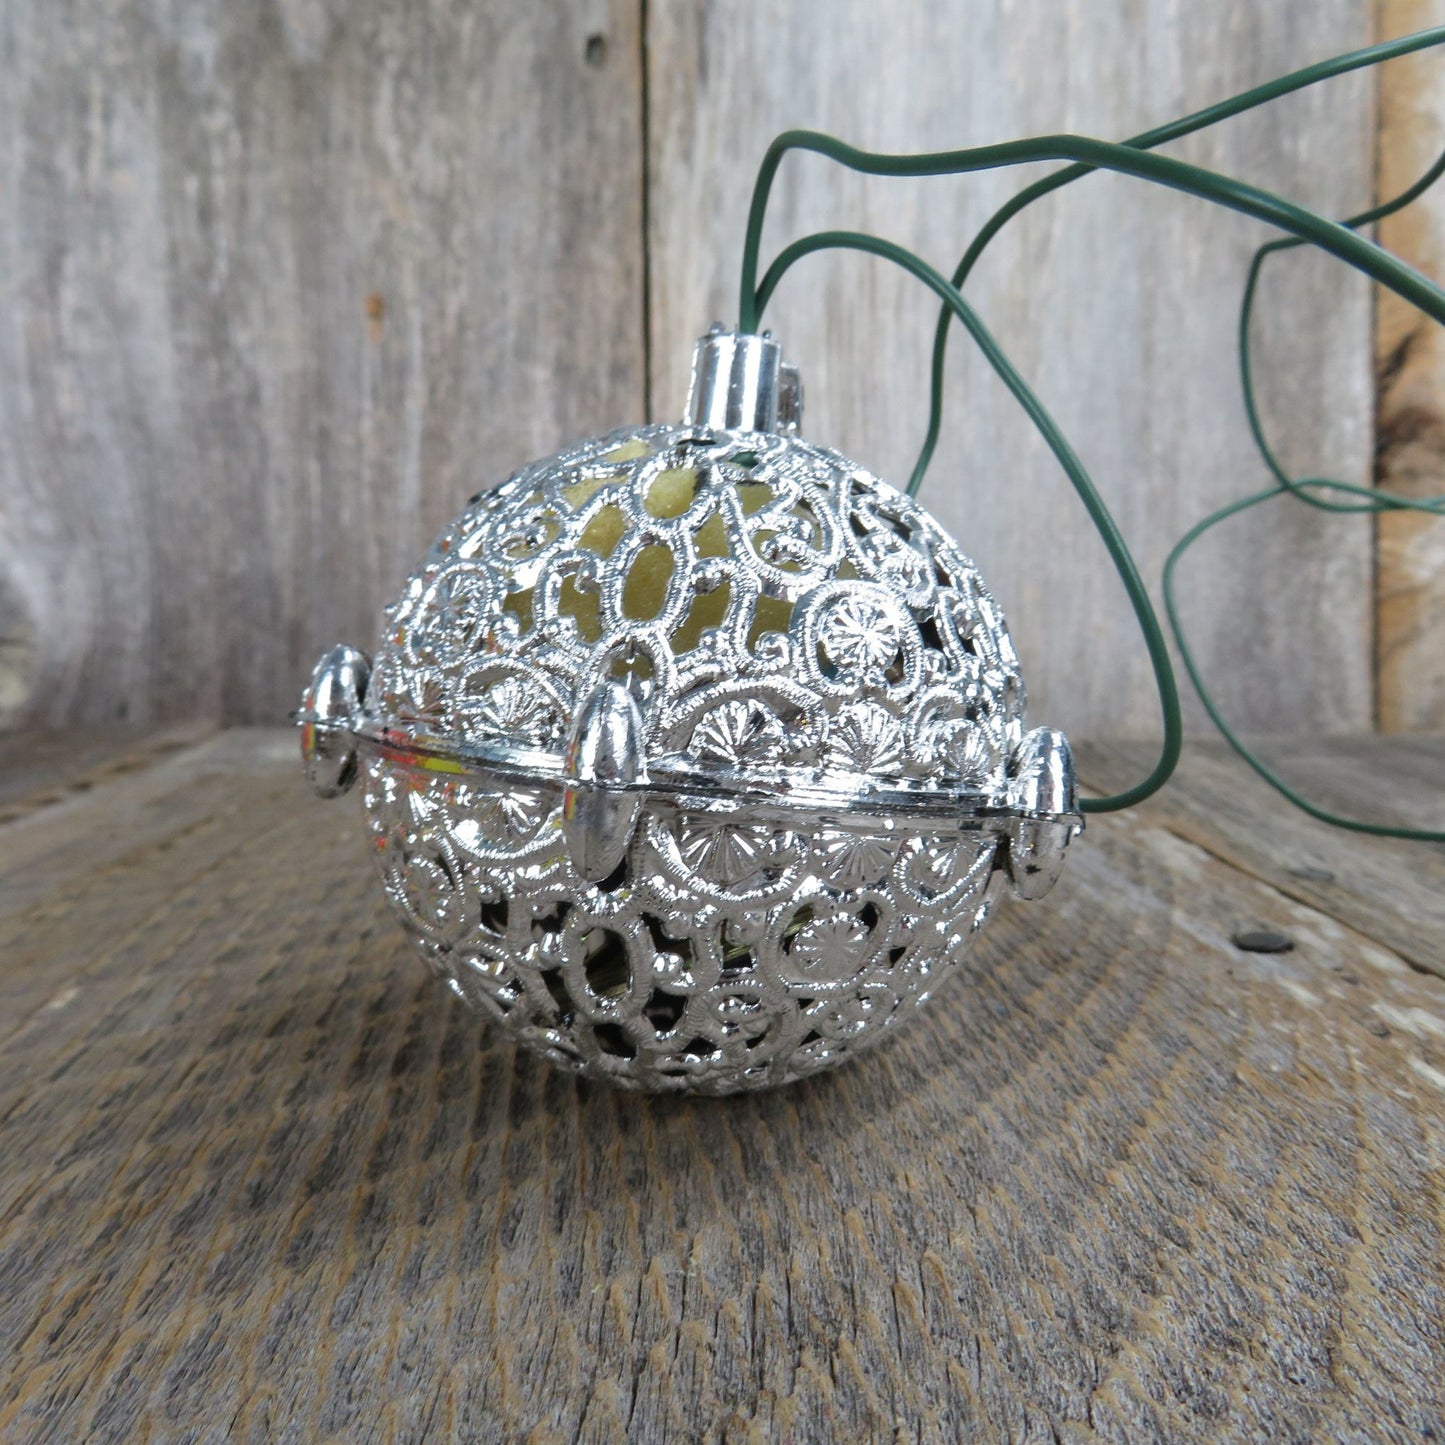 Vintage Chirping Bird Ornament Everglow Electronic Chirp Christmas Silver Ball Singing Video